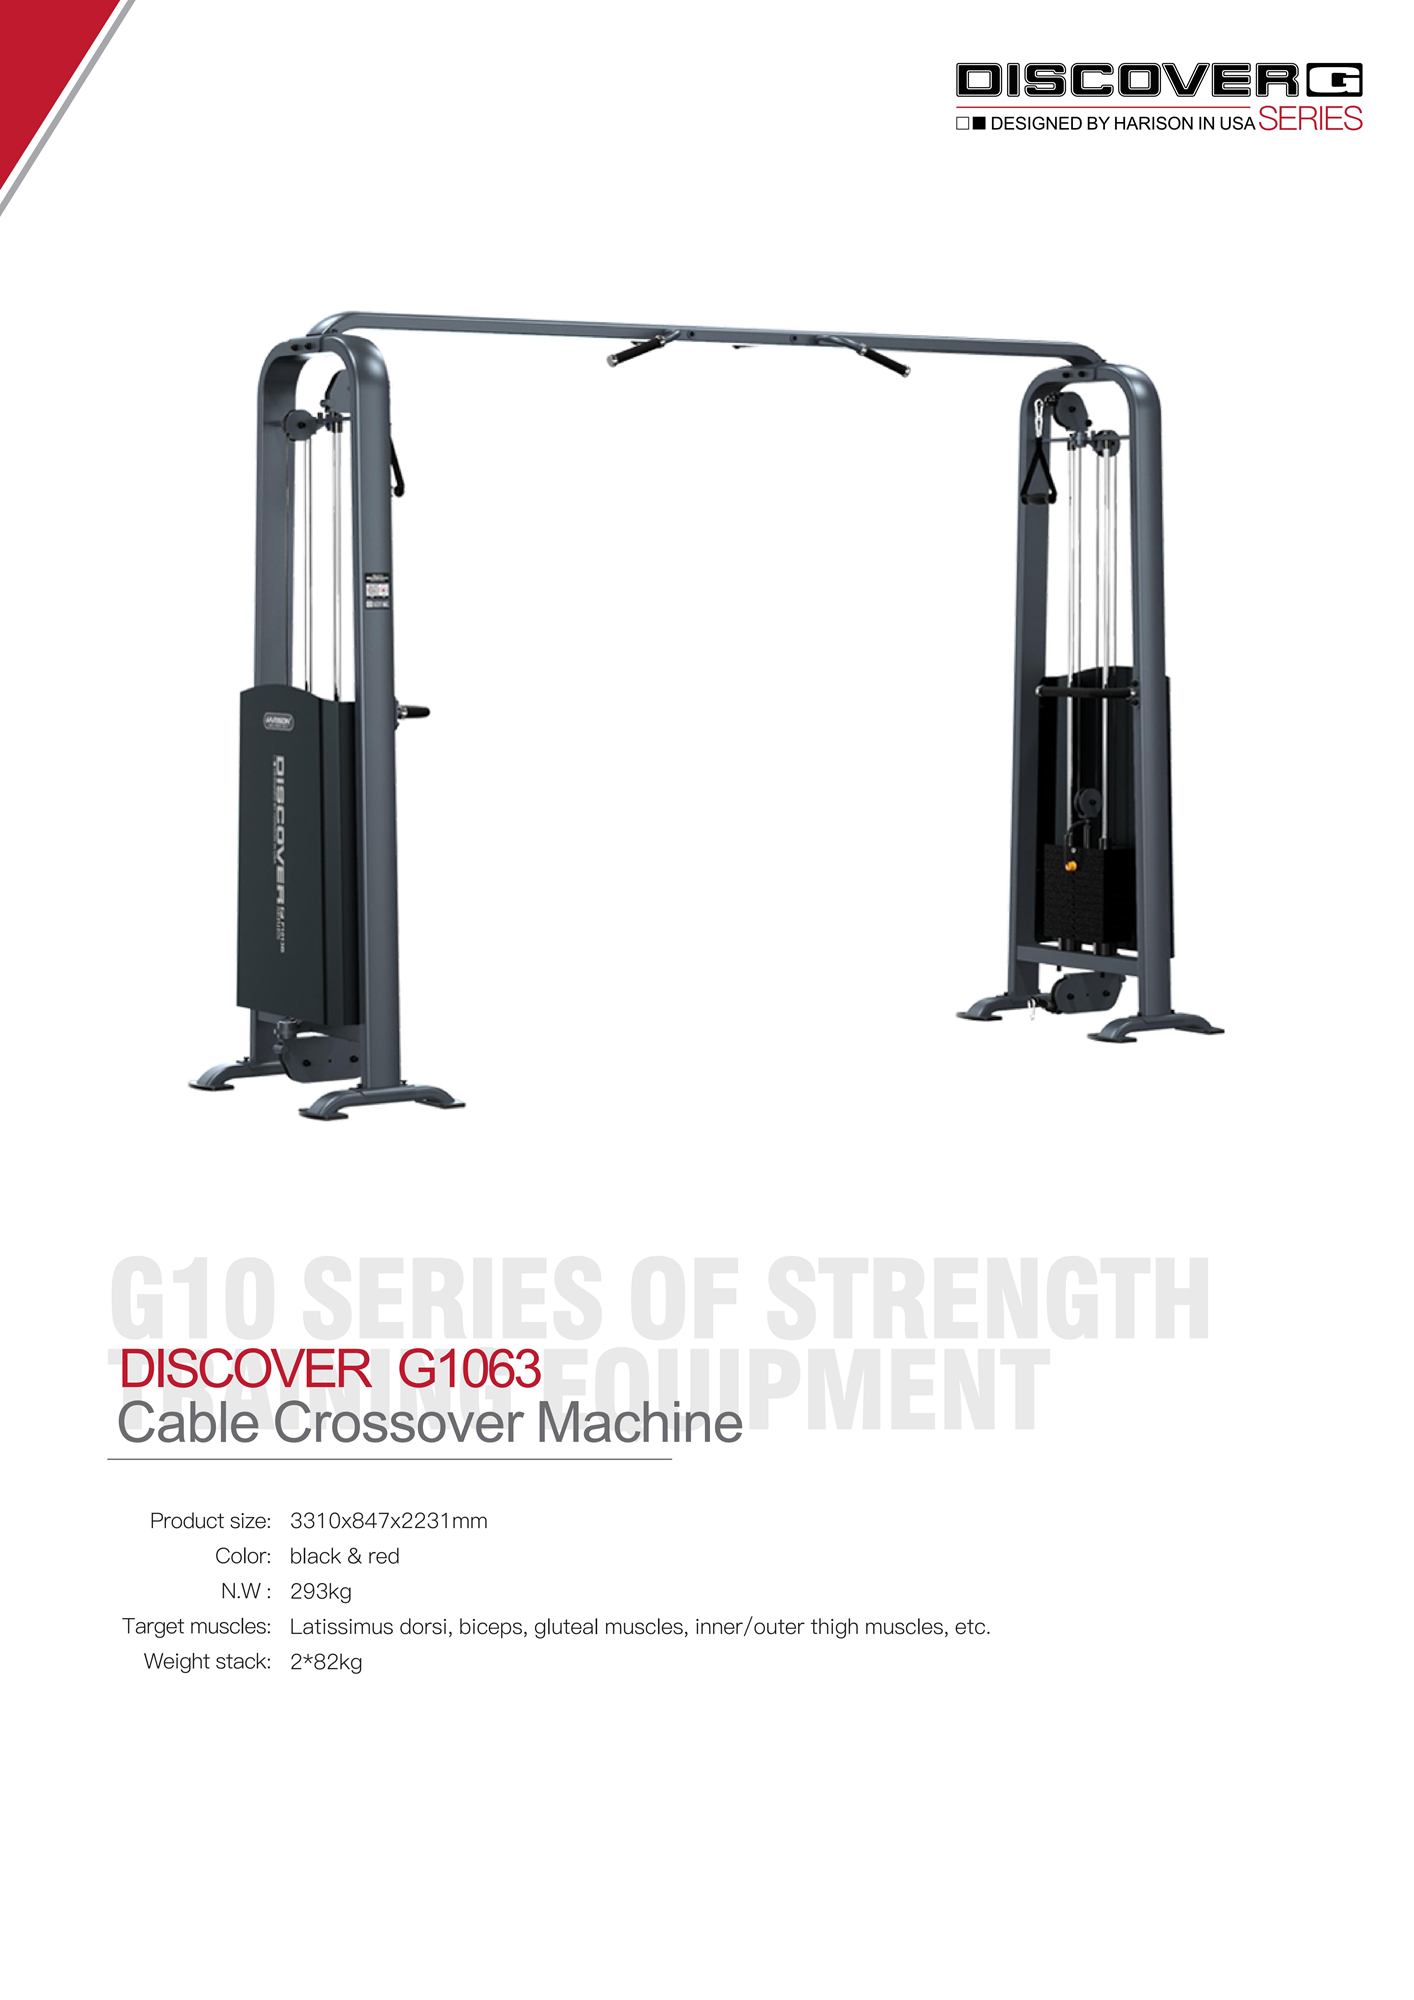 DISCOVER G1063 Cable Crossover Machine